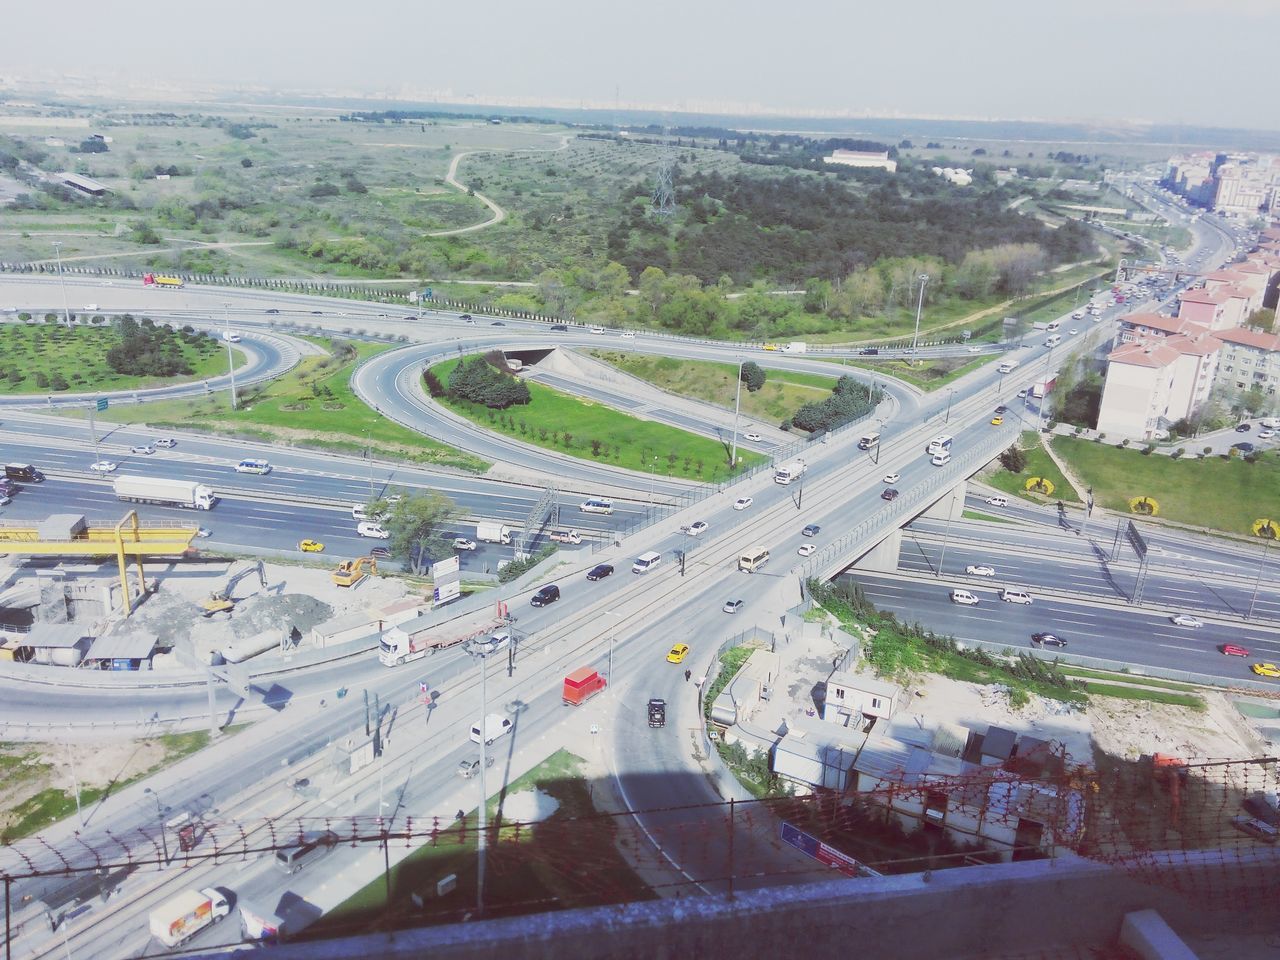 transportation, high angle view, road, aerial view, mode of transport, landscape, road marking, car, land vehicle, highway, built structure, travel, mountain, architecture, day, connection, outdoors, bridge - man made structure, city, tree